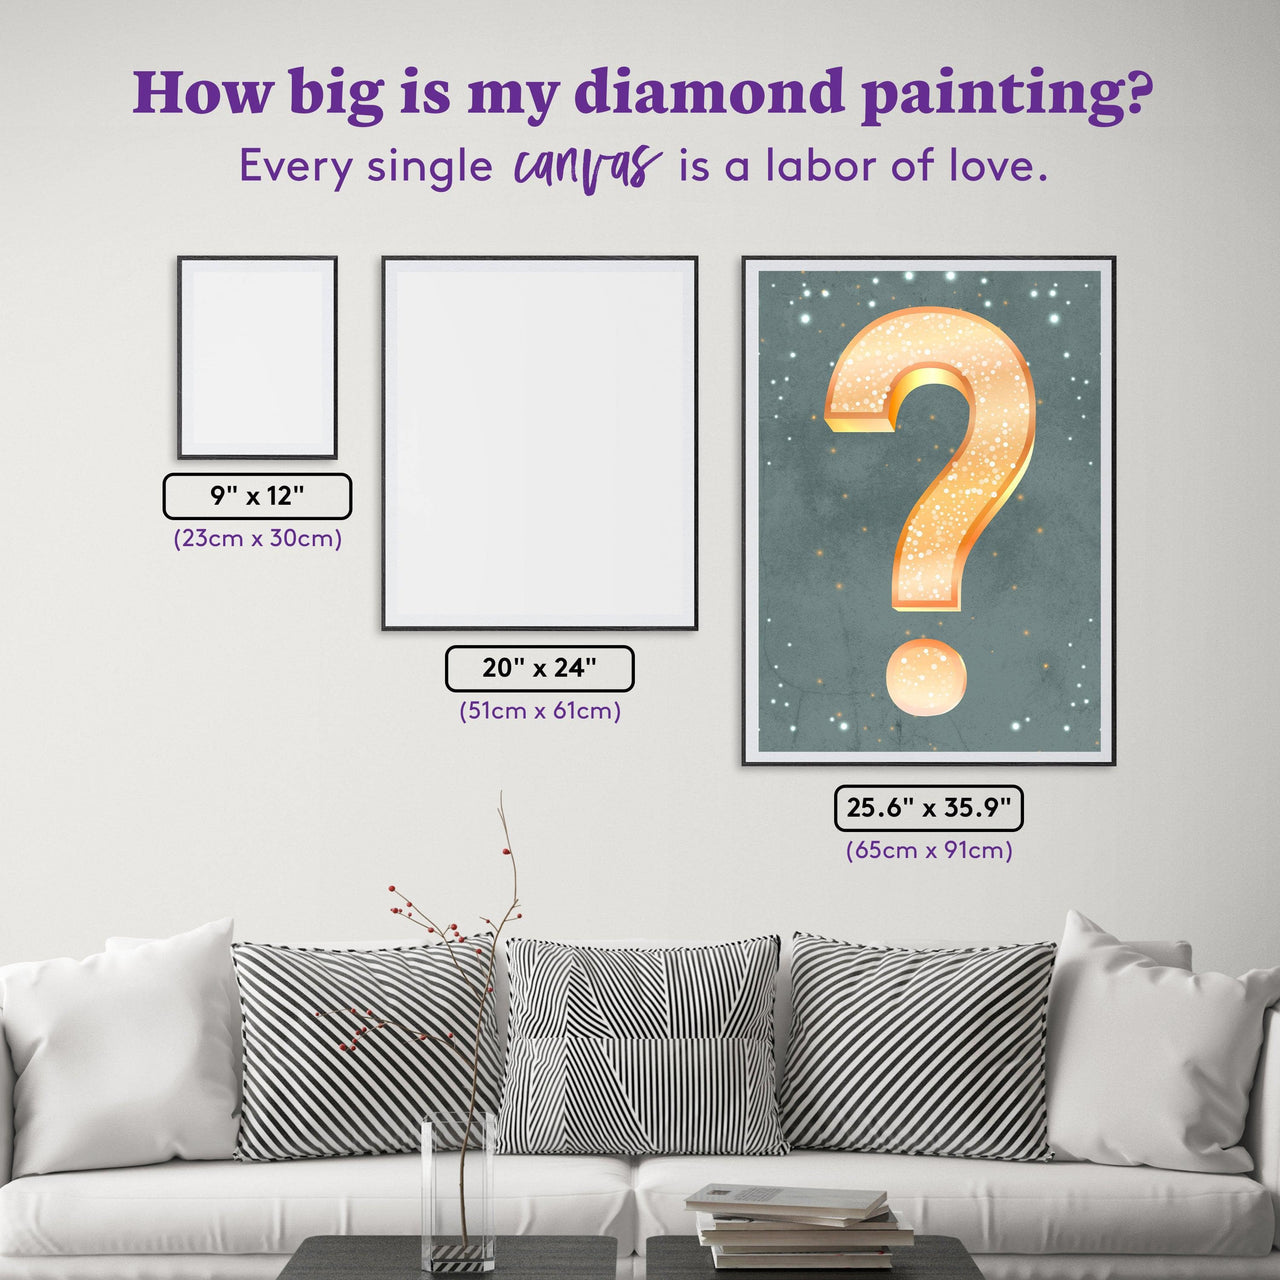 Diamond Painting Mystery Kit - Fantasy (Variety) 25.6" x 35.9" (65cm x 91cm) / Square With 60 Colors Including 3 ABs / 92,777